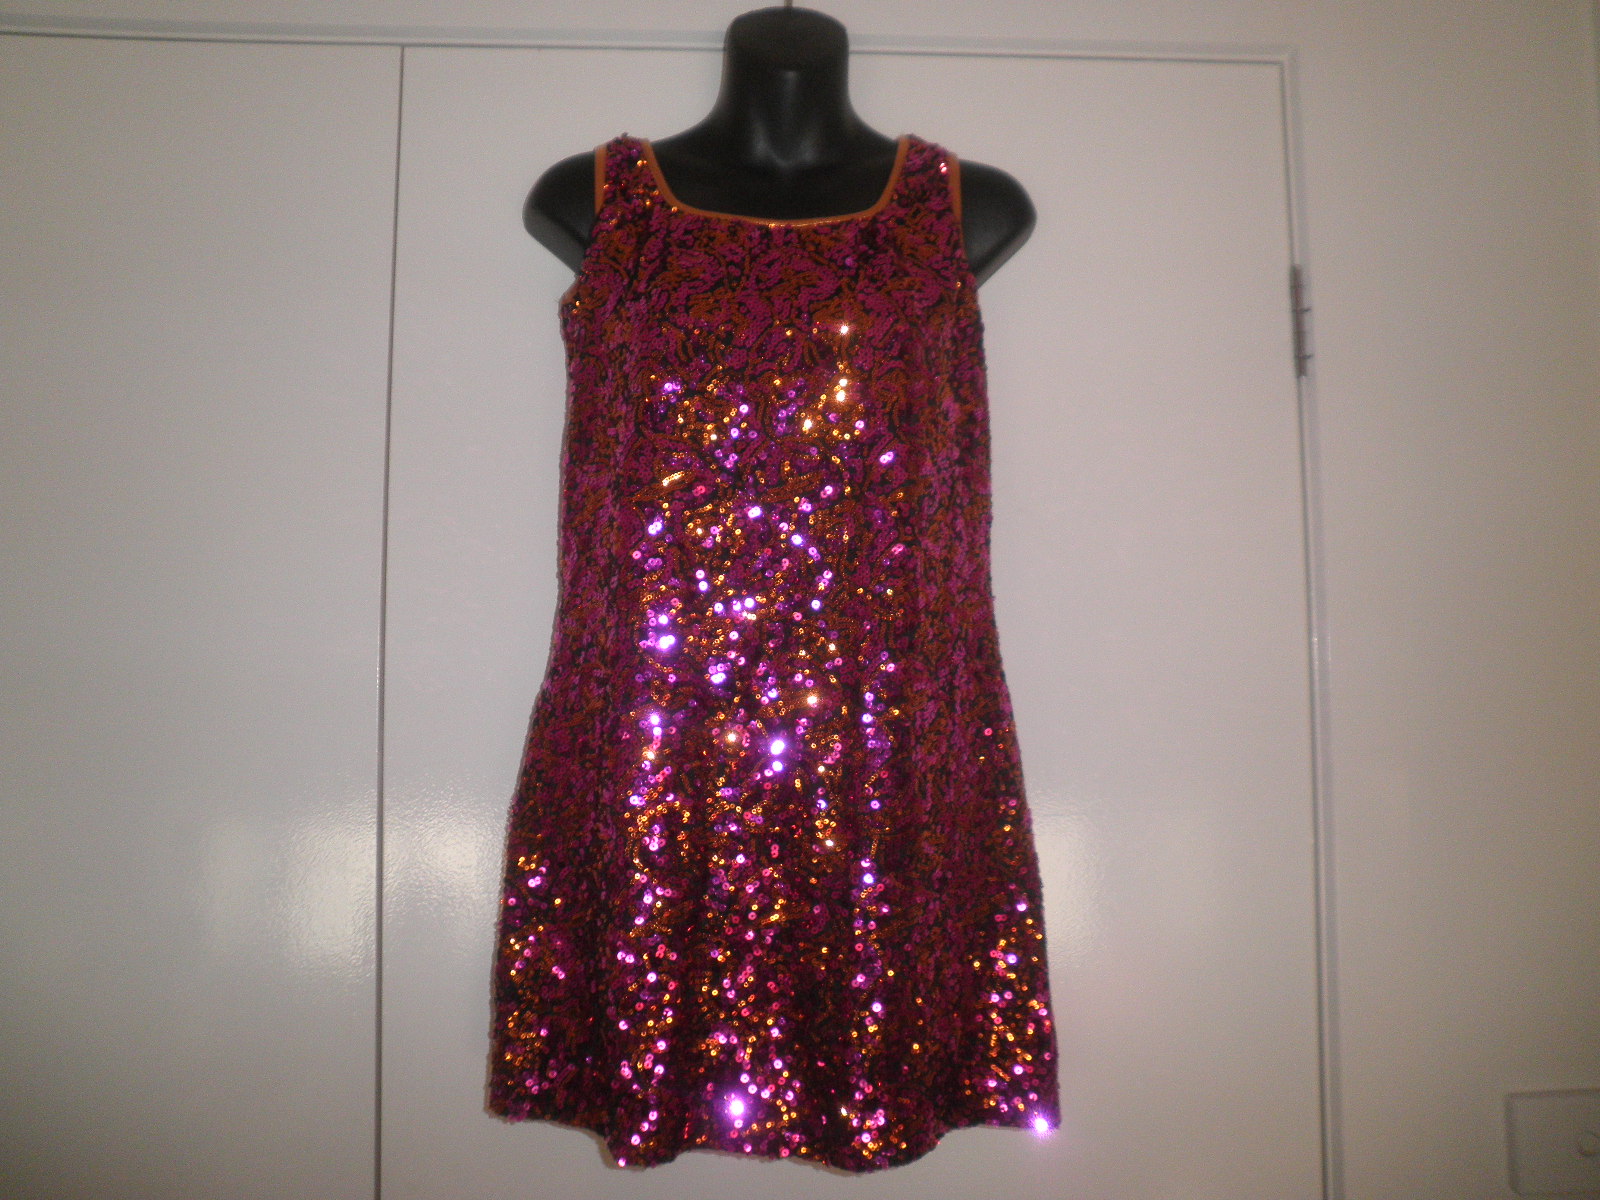 Preloved Solo Dansco Brand Fully Sequinned Dress with Built in Leotard Size LA